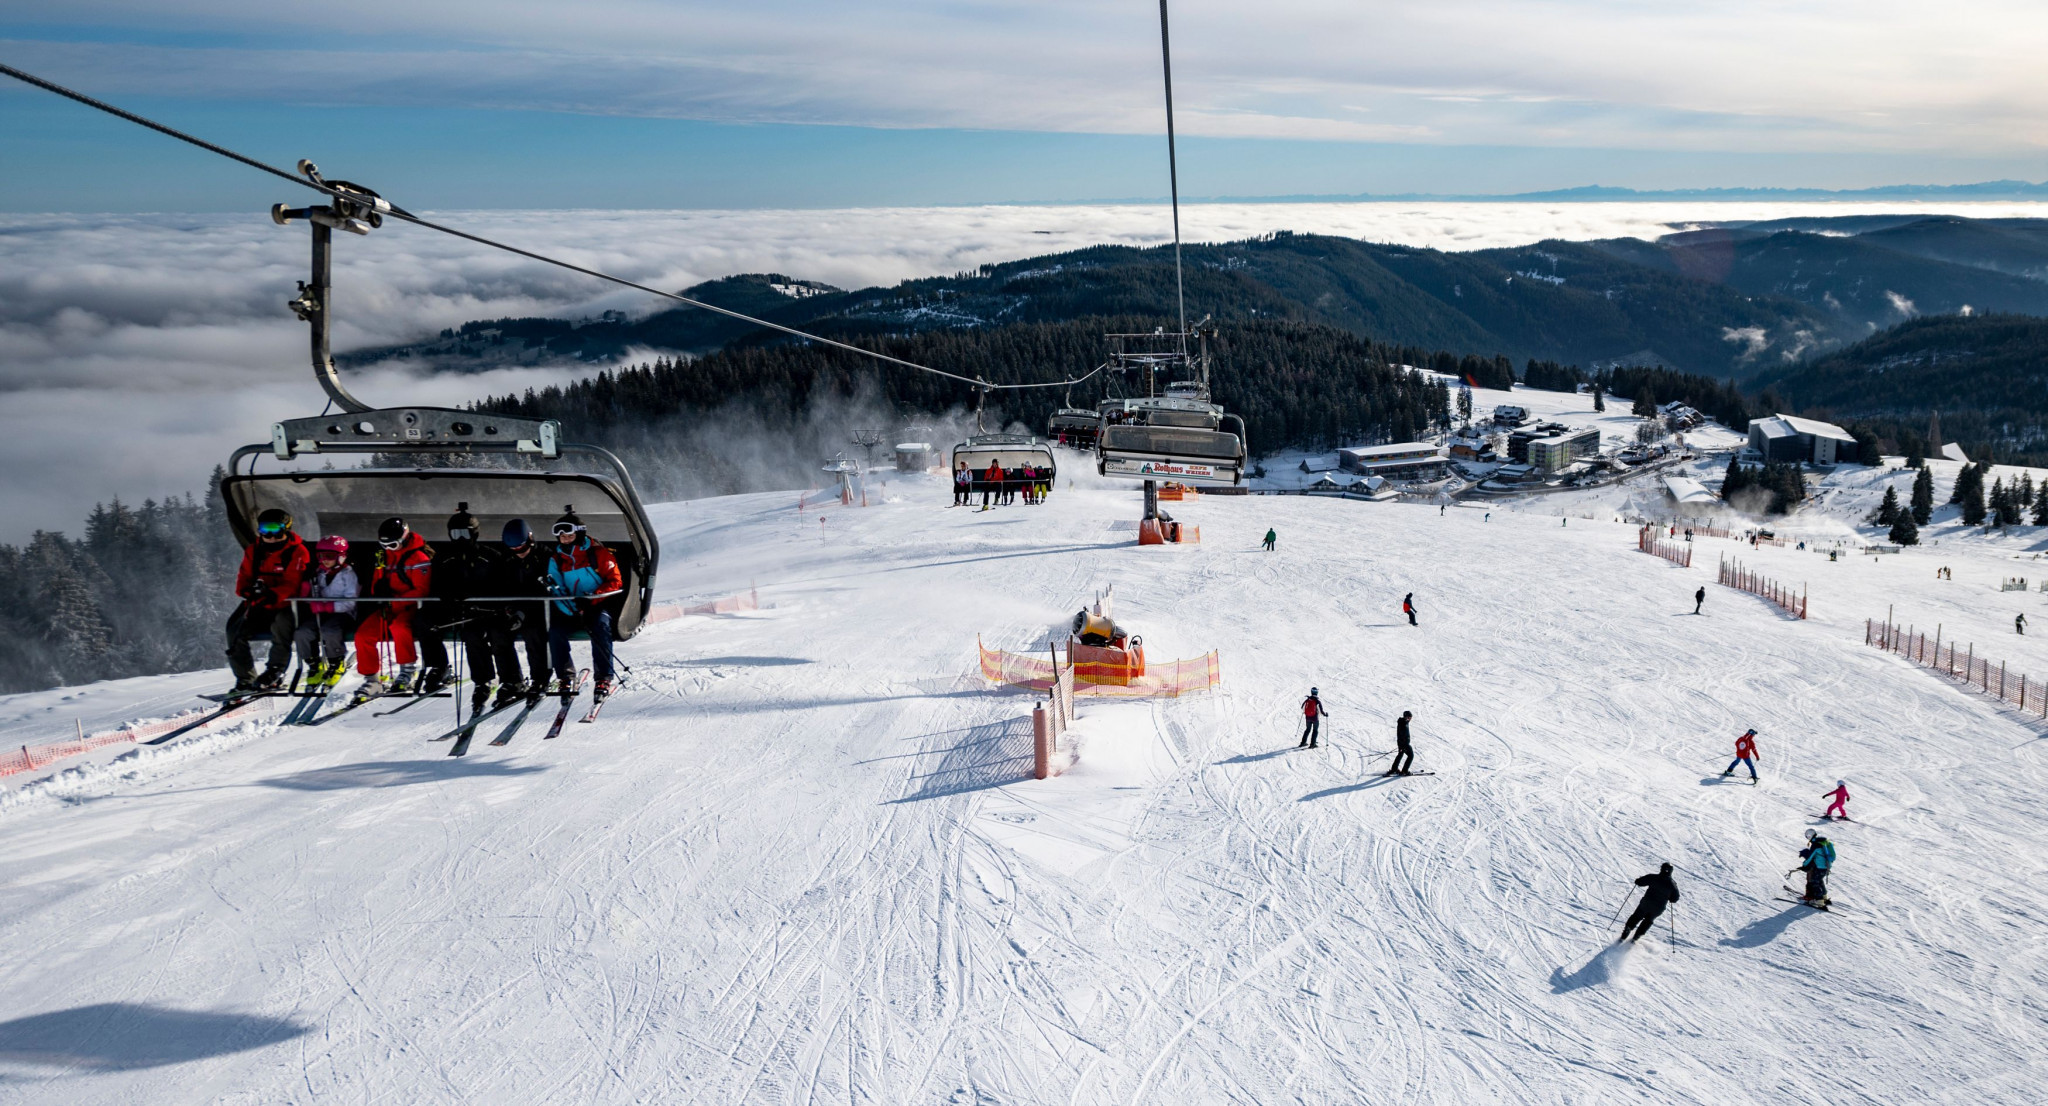 German resort Feldberg was supposed to be the fifth leg of the Snowboard Cross World Cup ©Getty Images